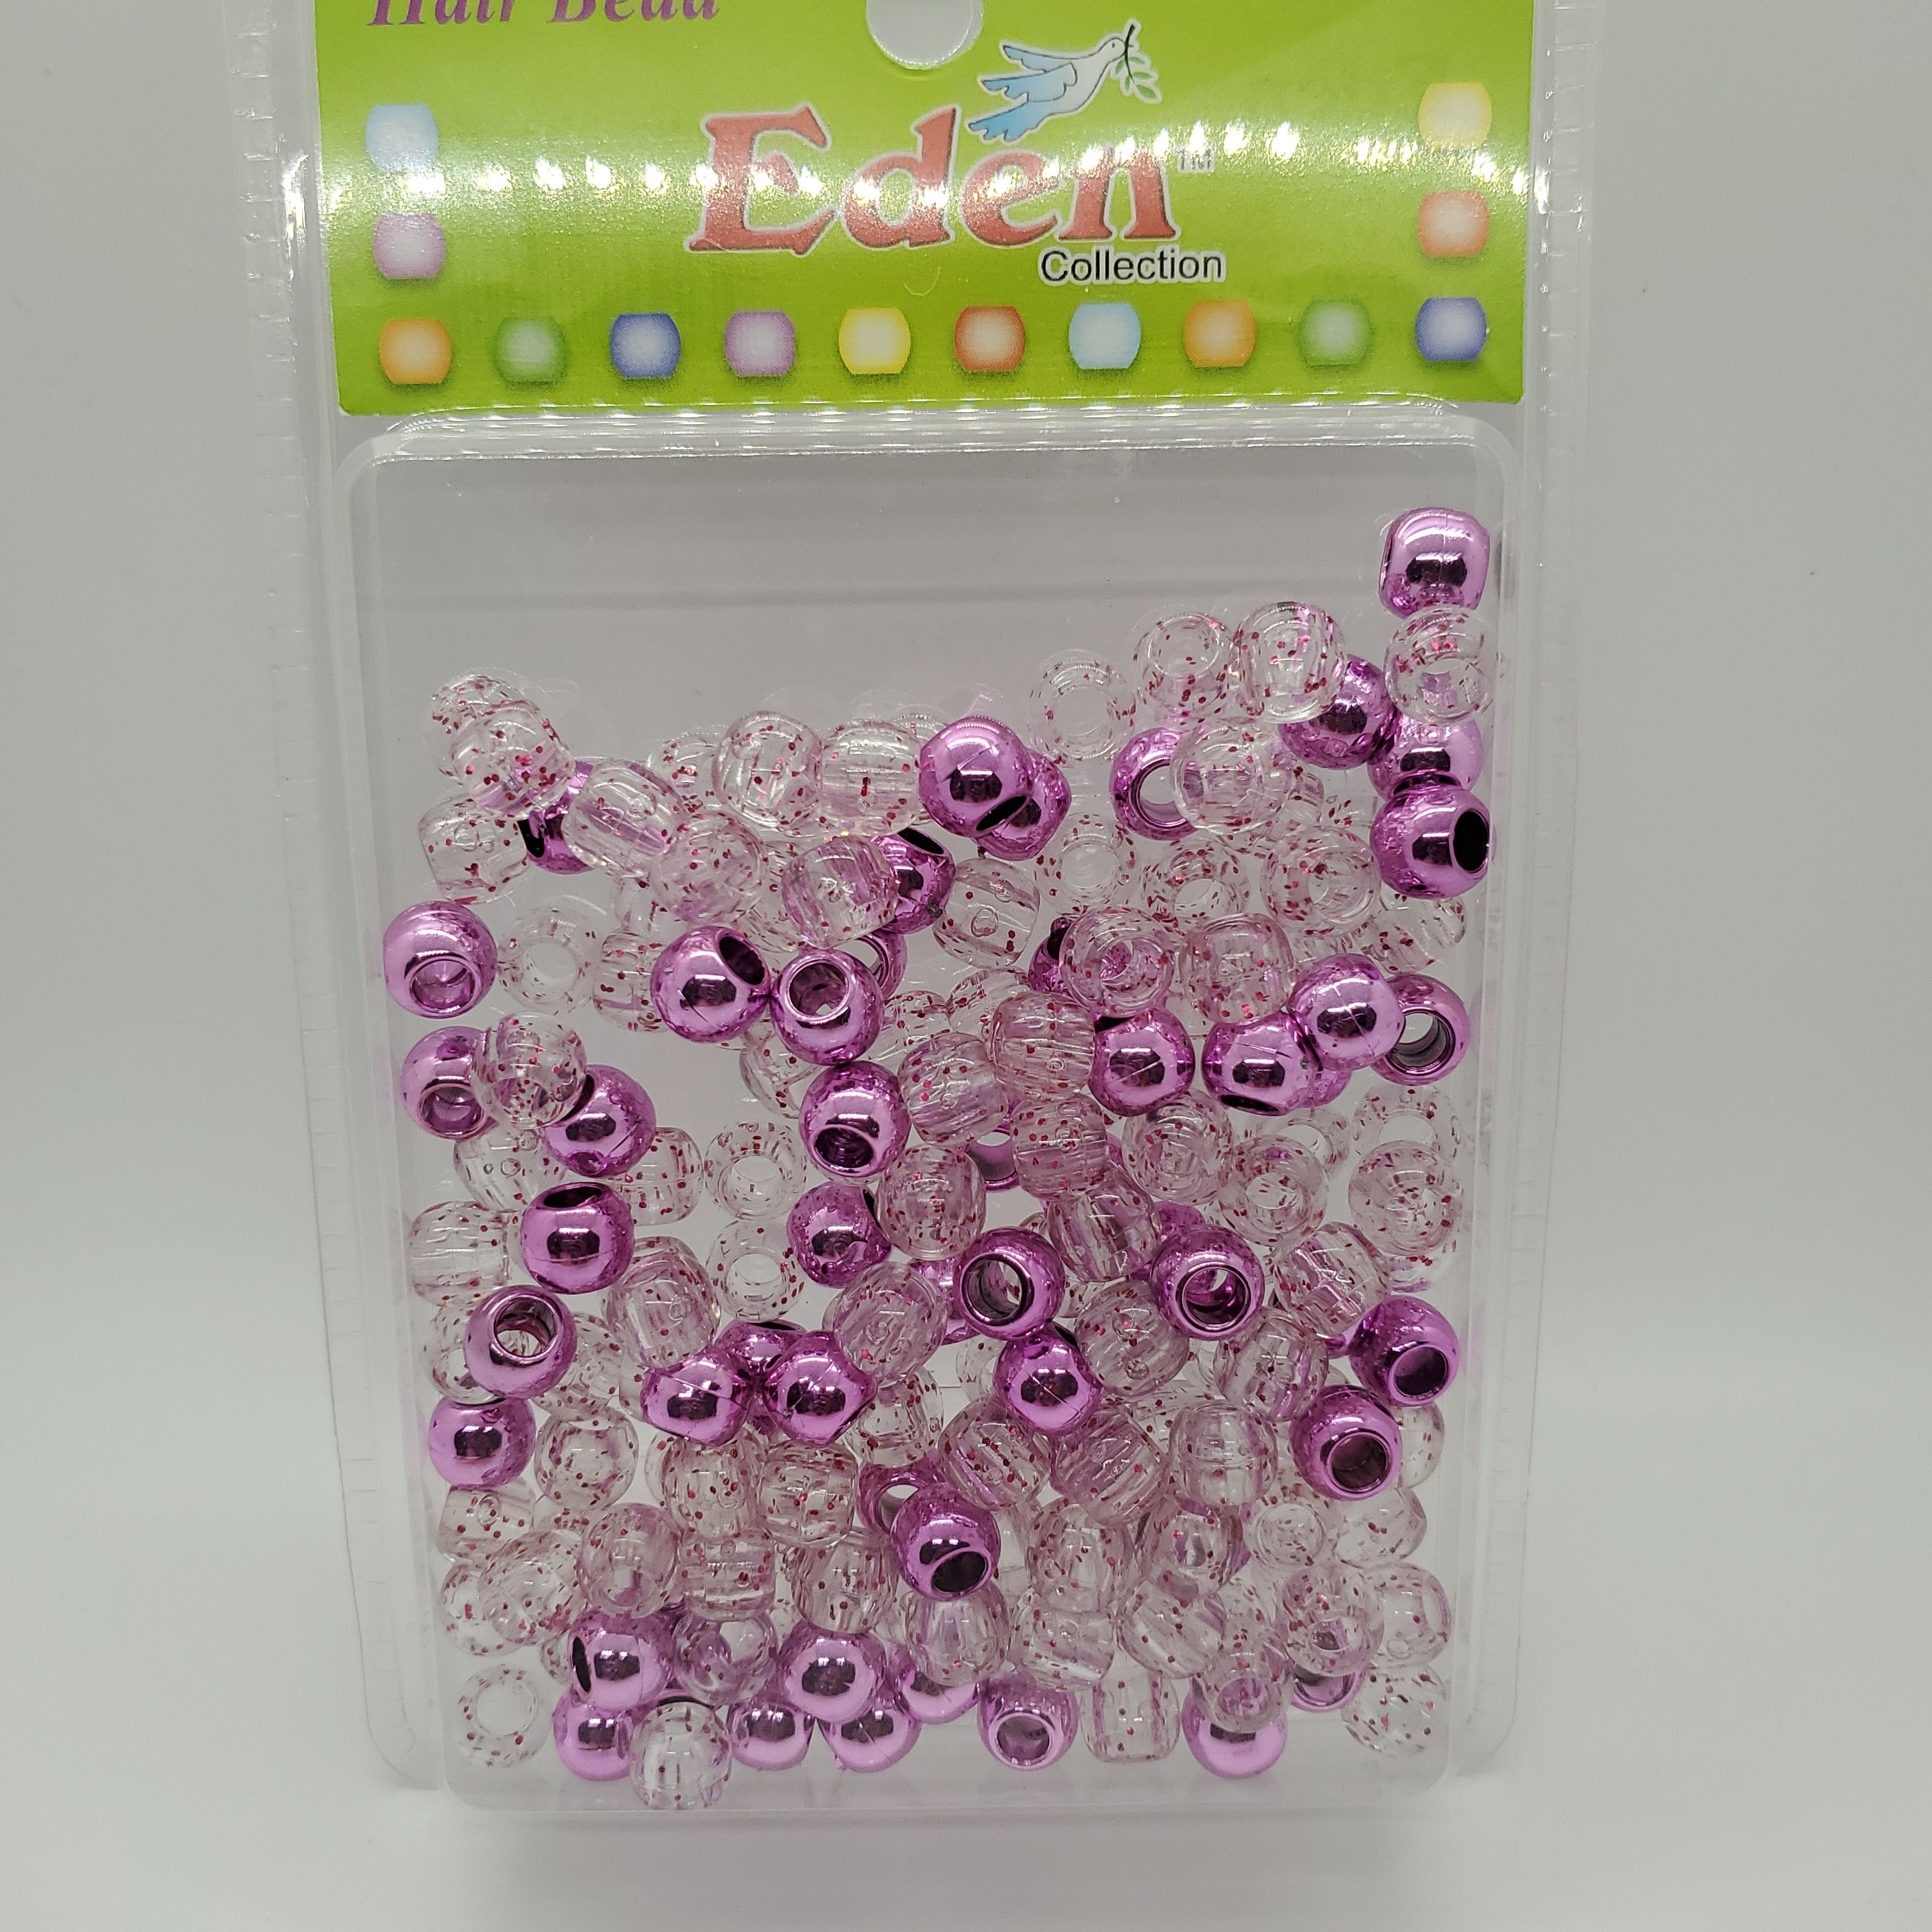 Eden Collection  Large Hair Beads #BR9 - Beauty Bar & Supply